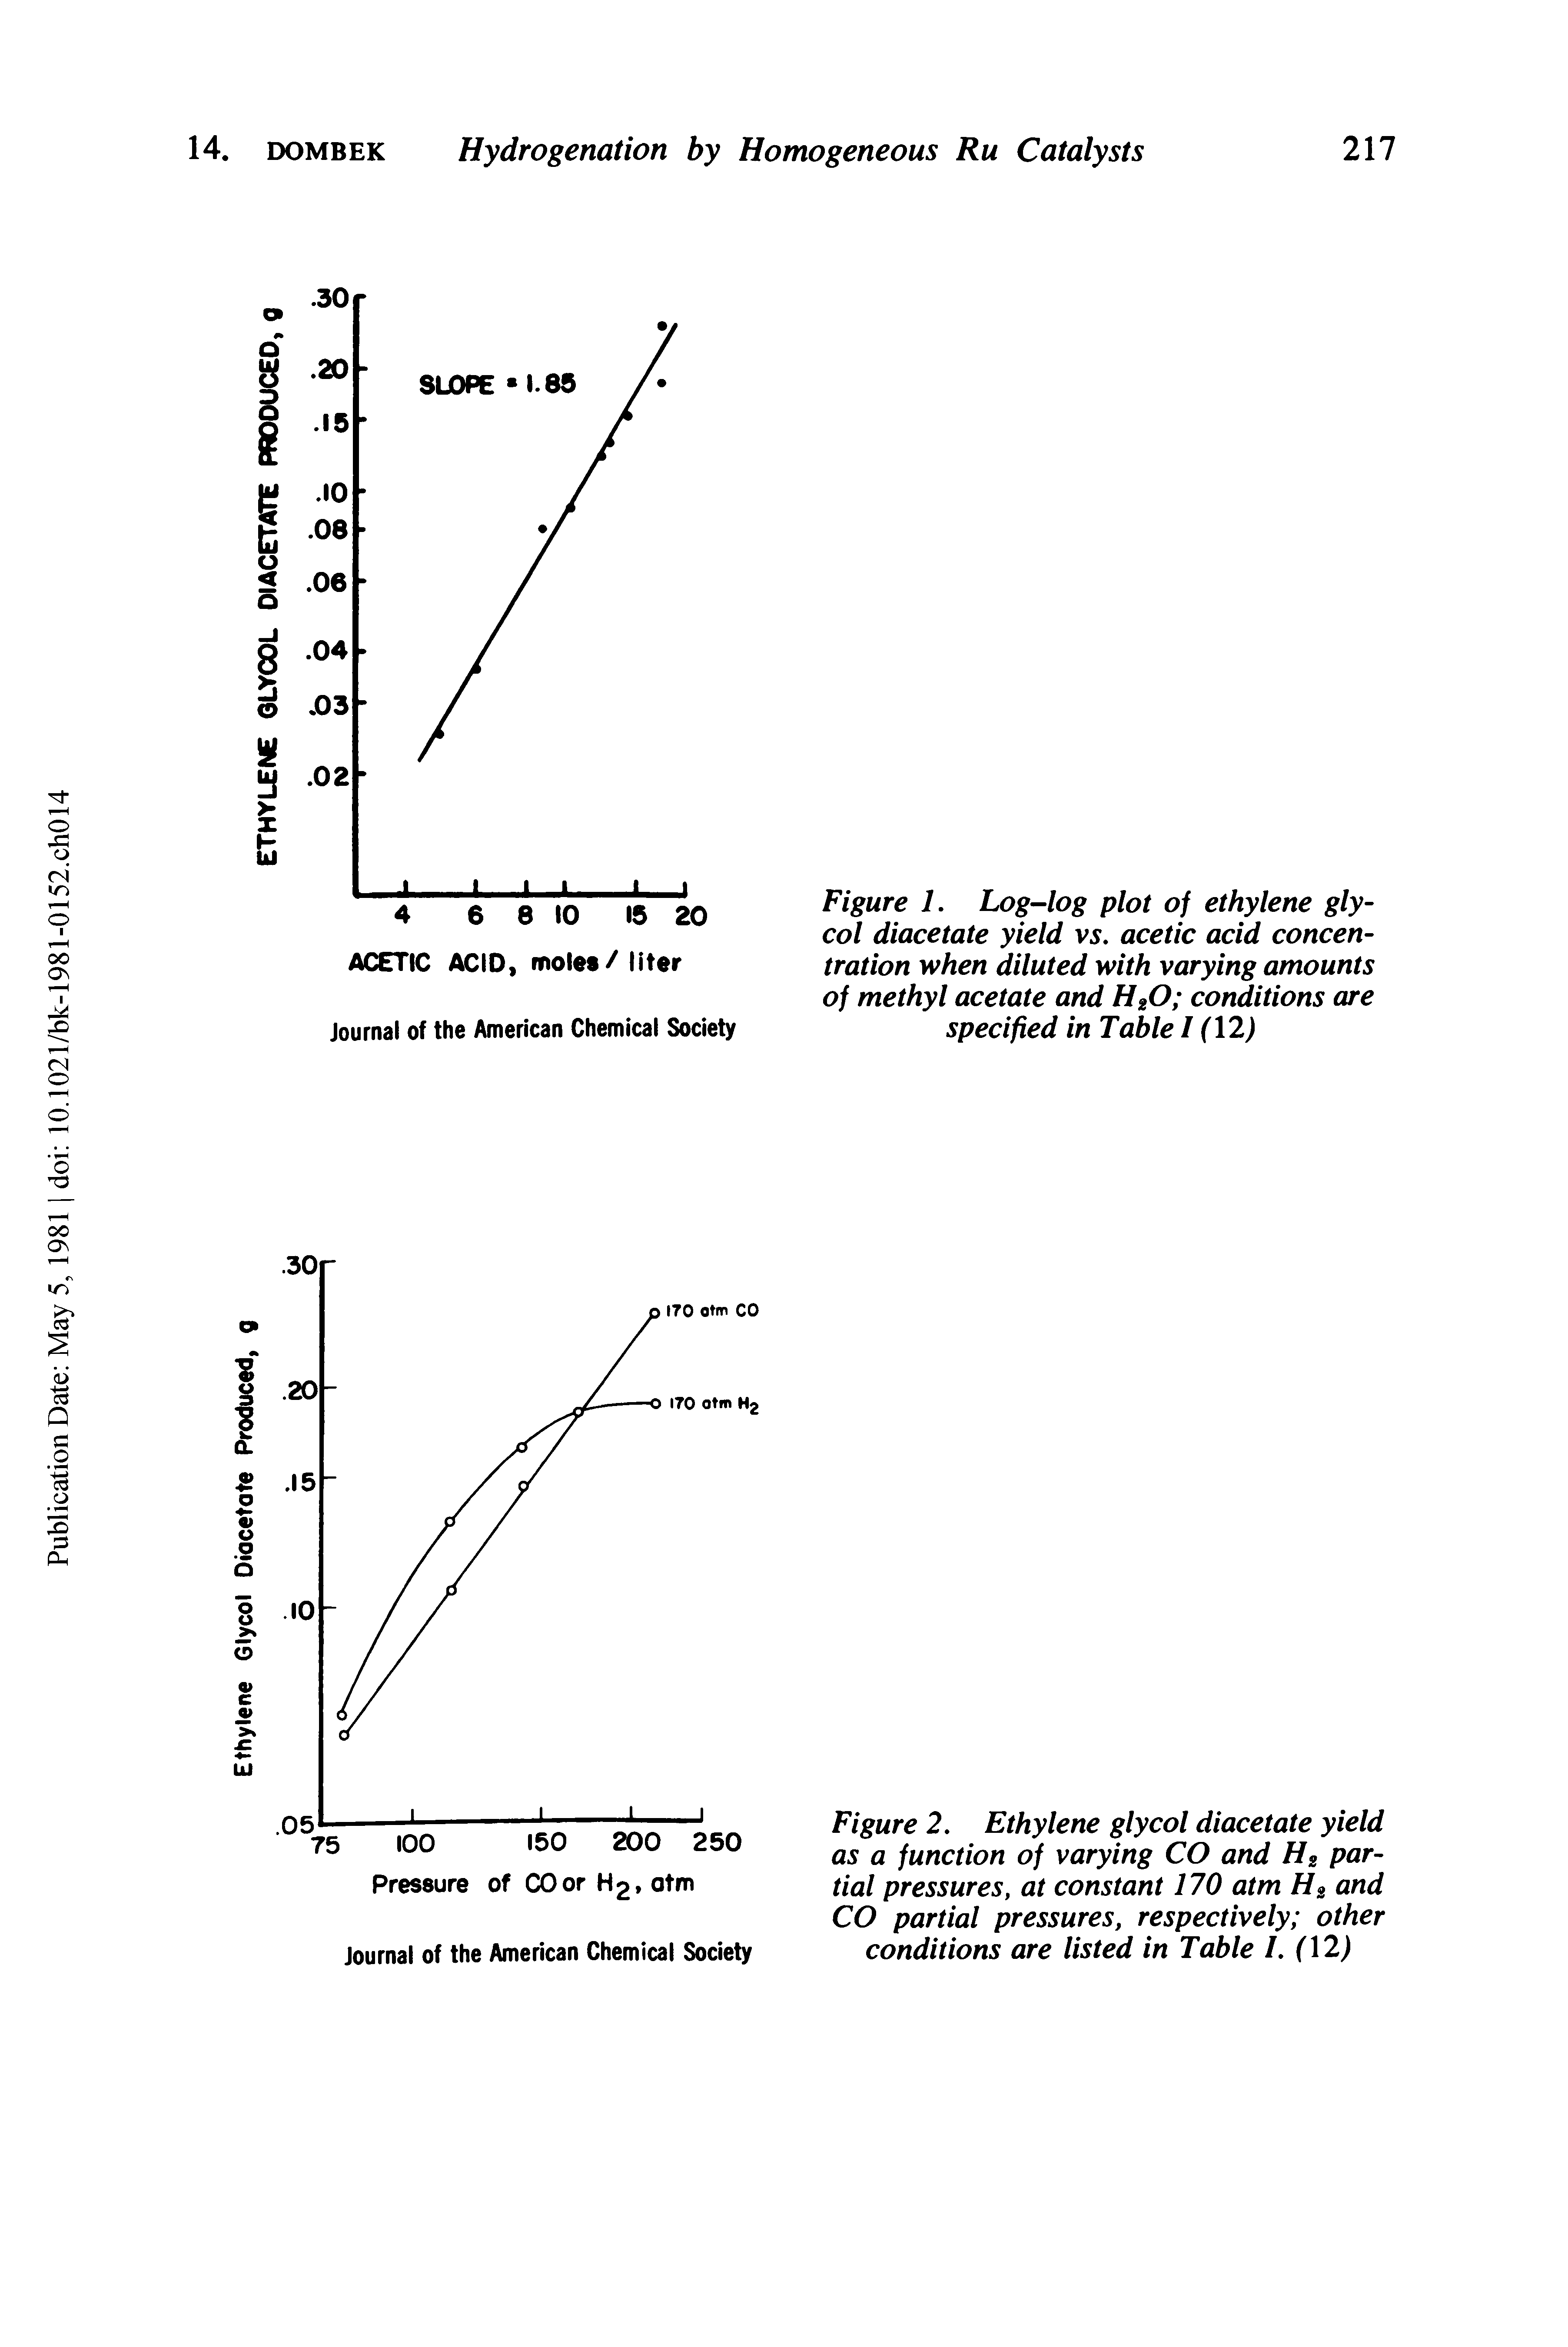 Figure 2. Ethylene glycol diacetate yield as a function of varying CO and H2 partial pressures, at constant 170 atm H2 and CO partial pressures, respectively other conditions are listed in Table 1. ( 2)...